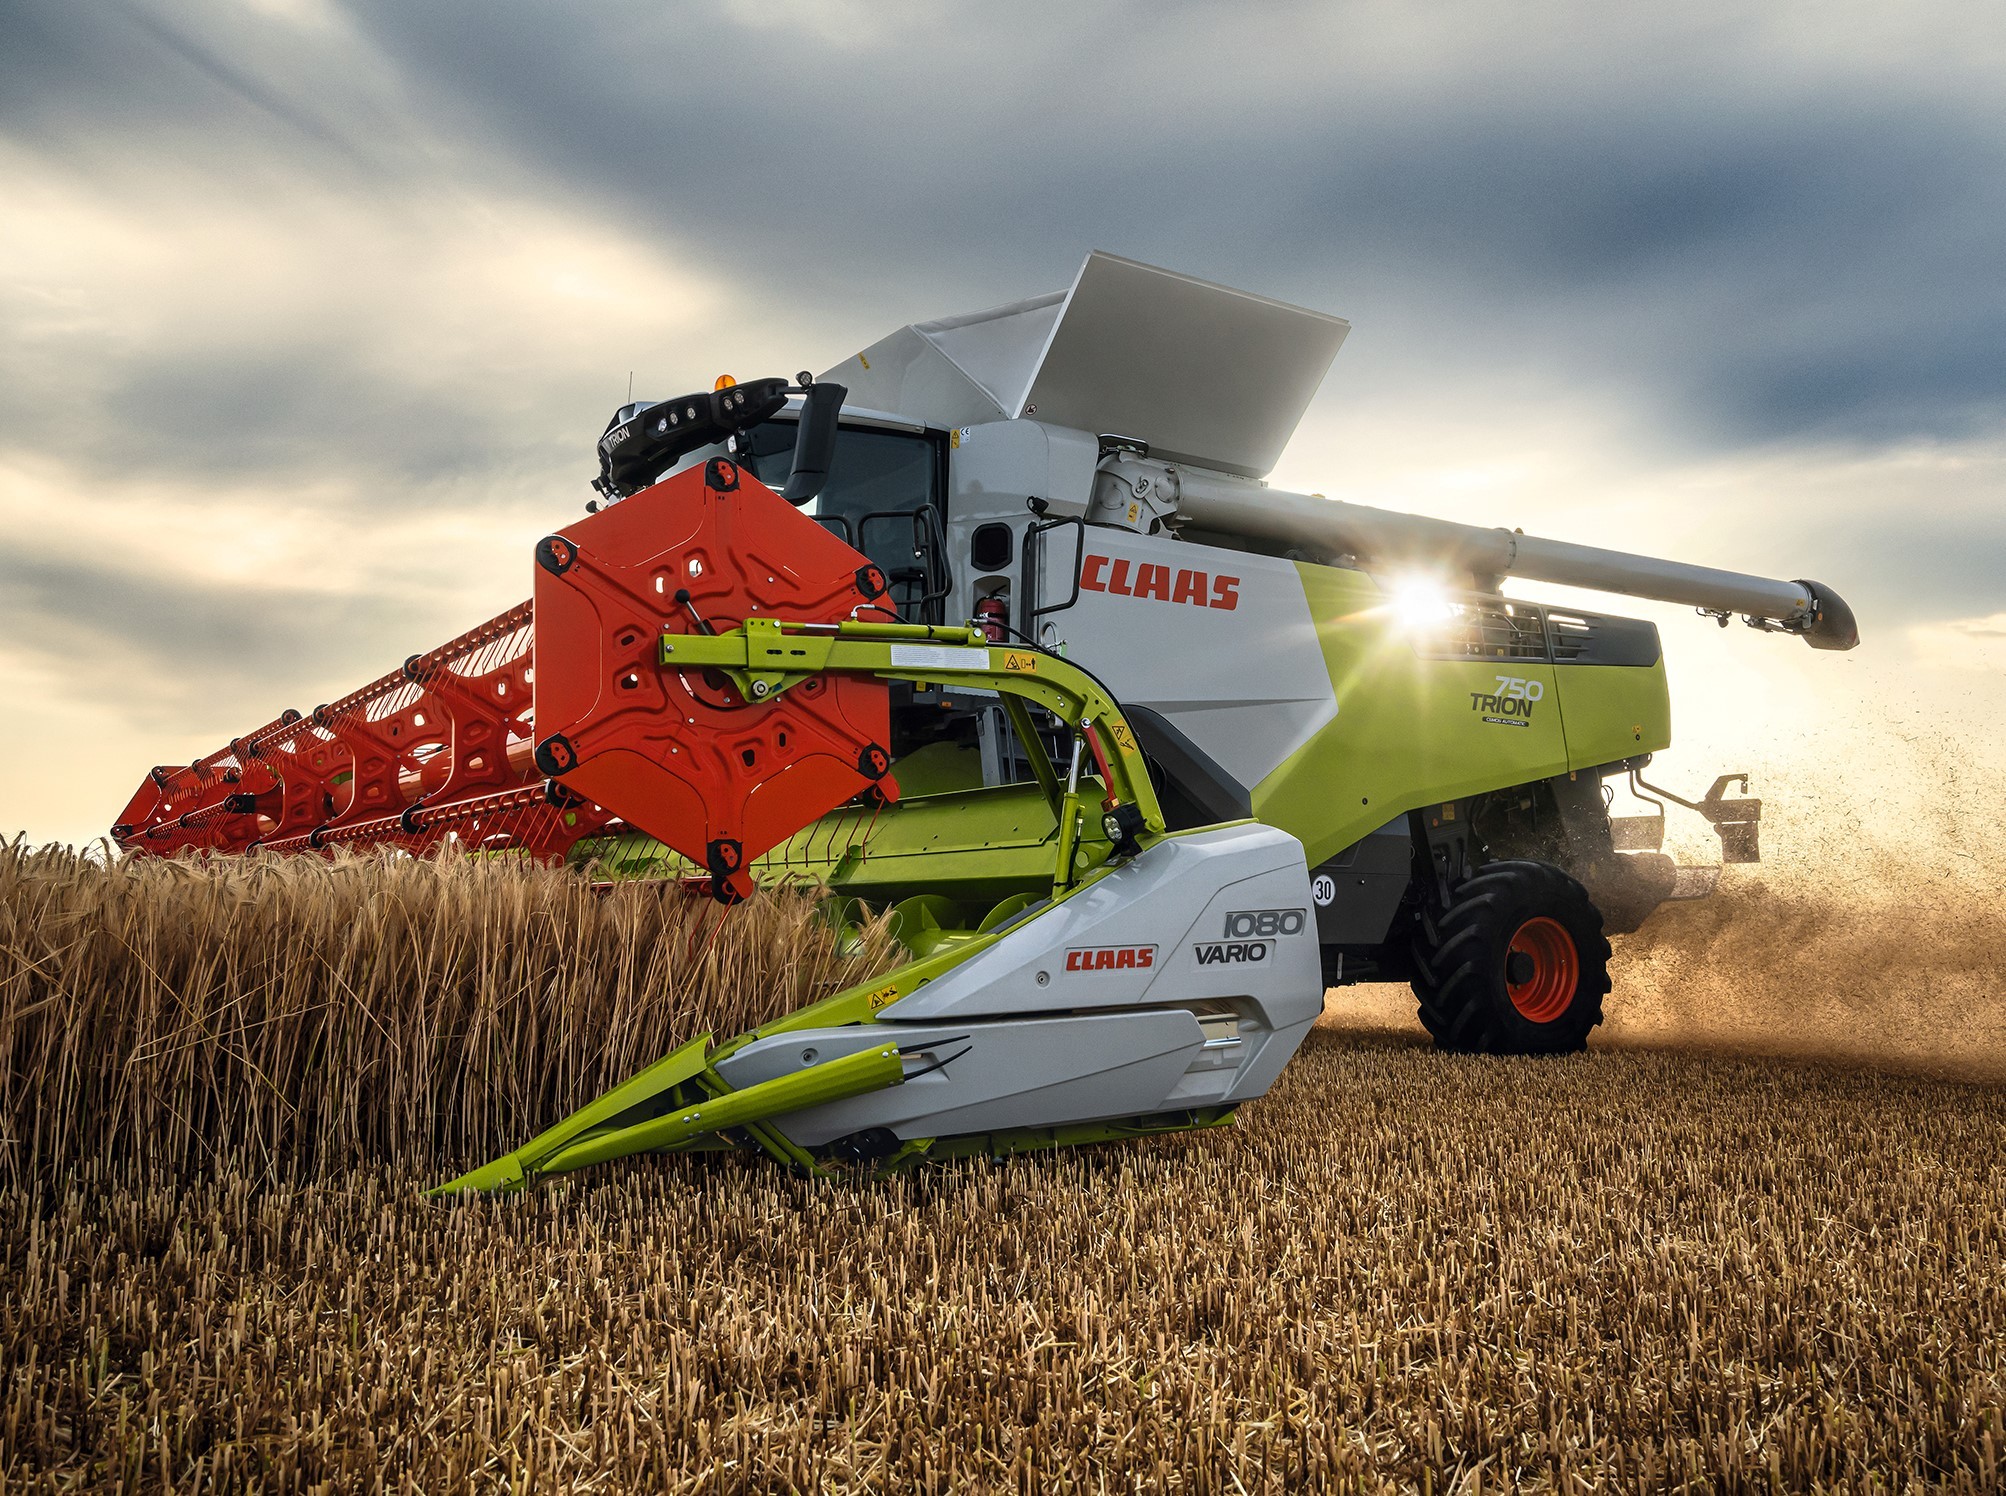 Claas Trion range replaces the Tucano and this is one of the larger models, the Trion 750